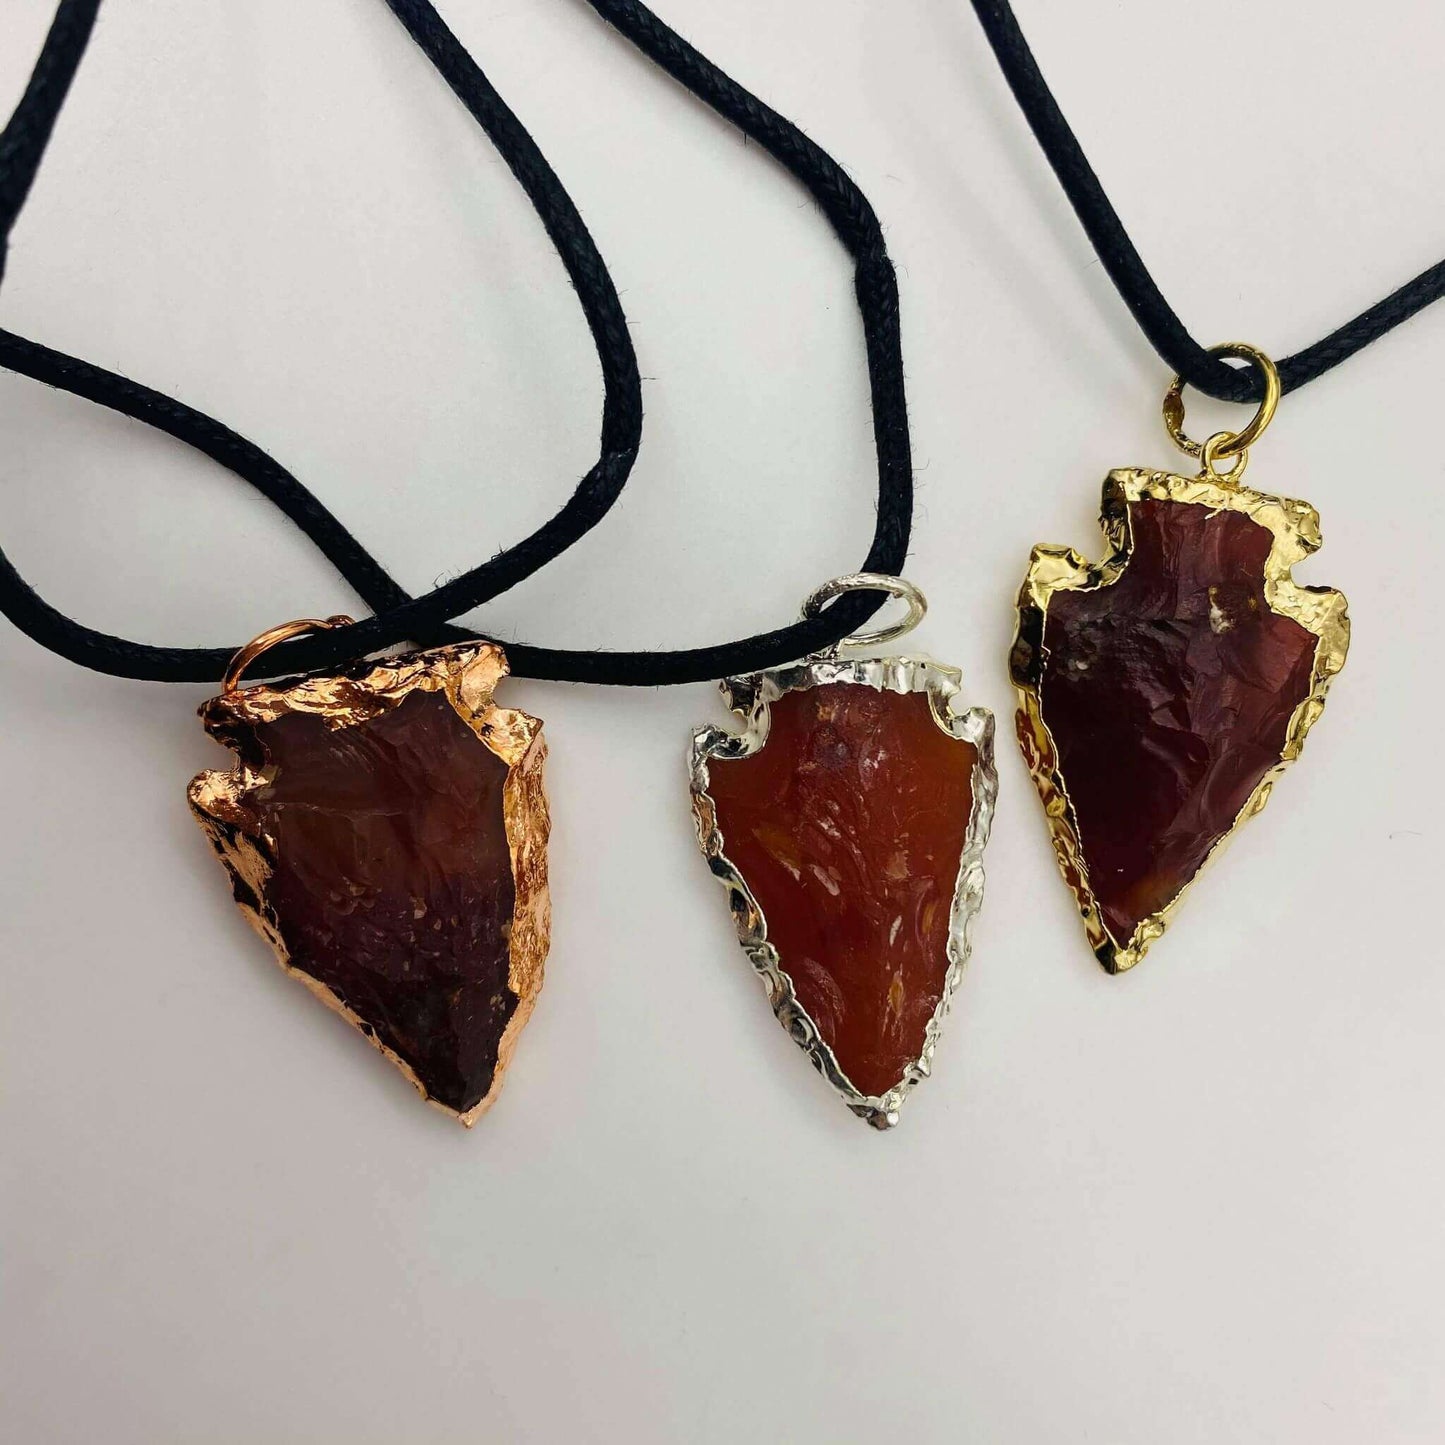 Carnelian Arrowhead Necklace at $25 only from Spiral Rain